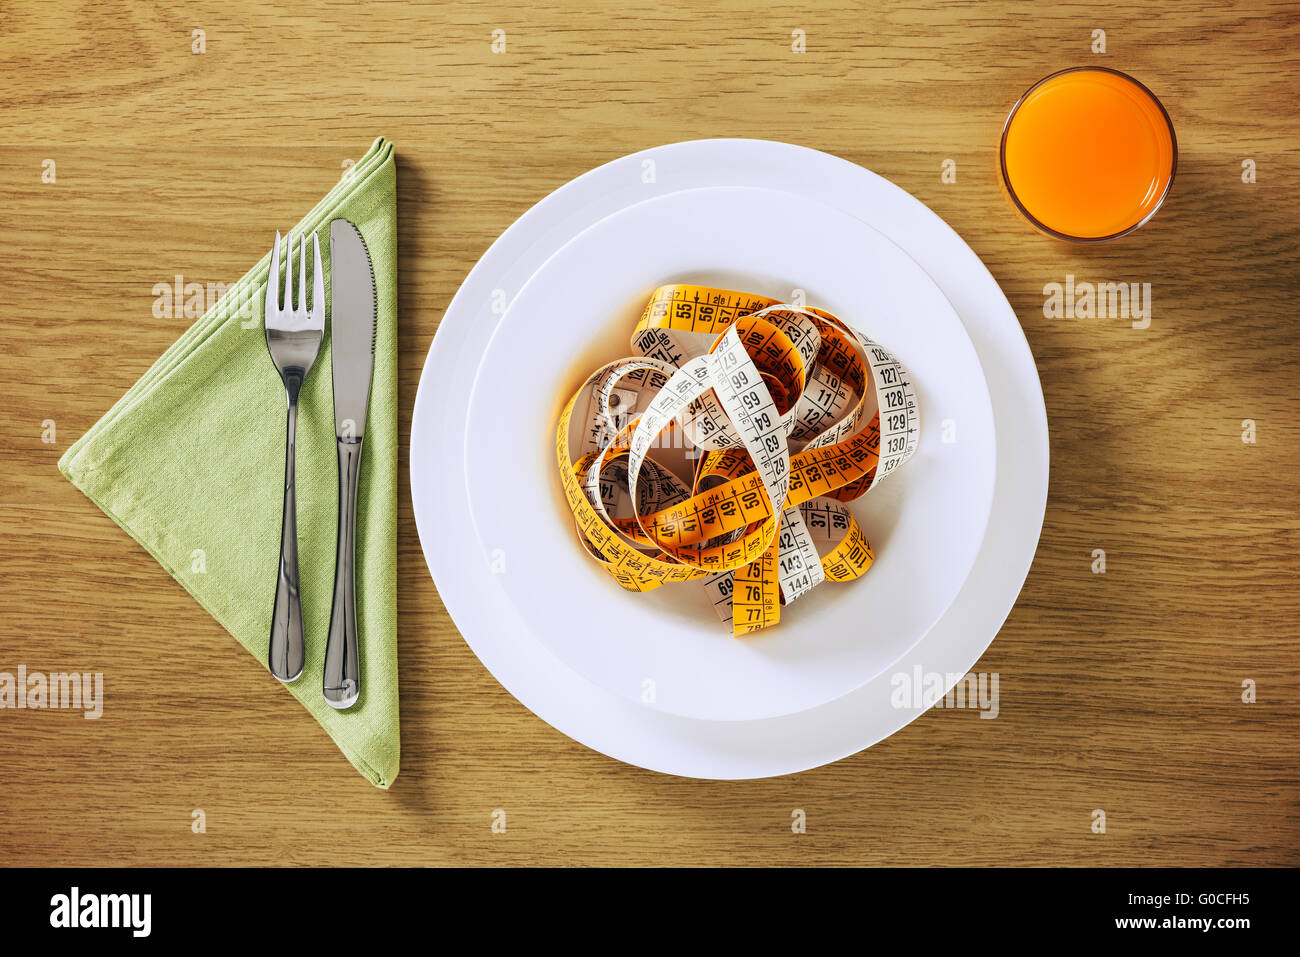 Healthy diet and weight loss concepts, table set on a wooden table with fruit juice and tape measure in a dish Stock Photo